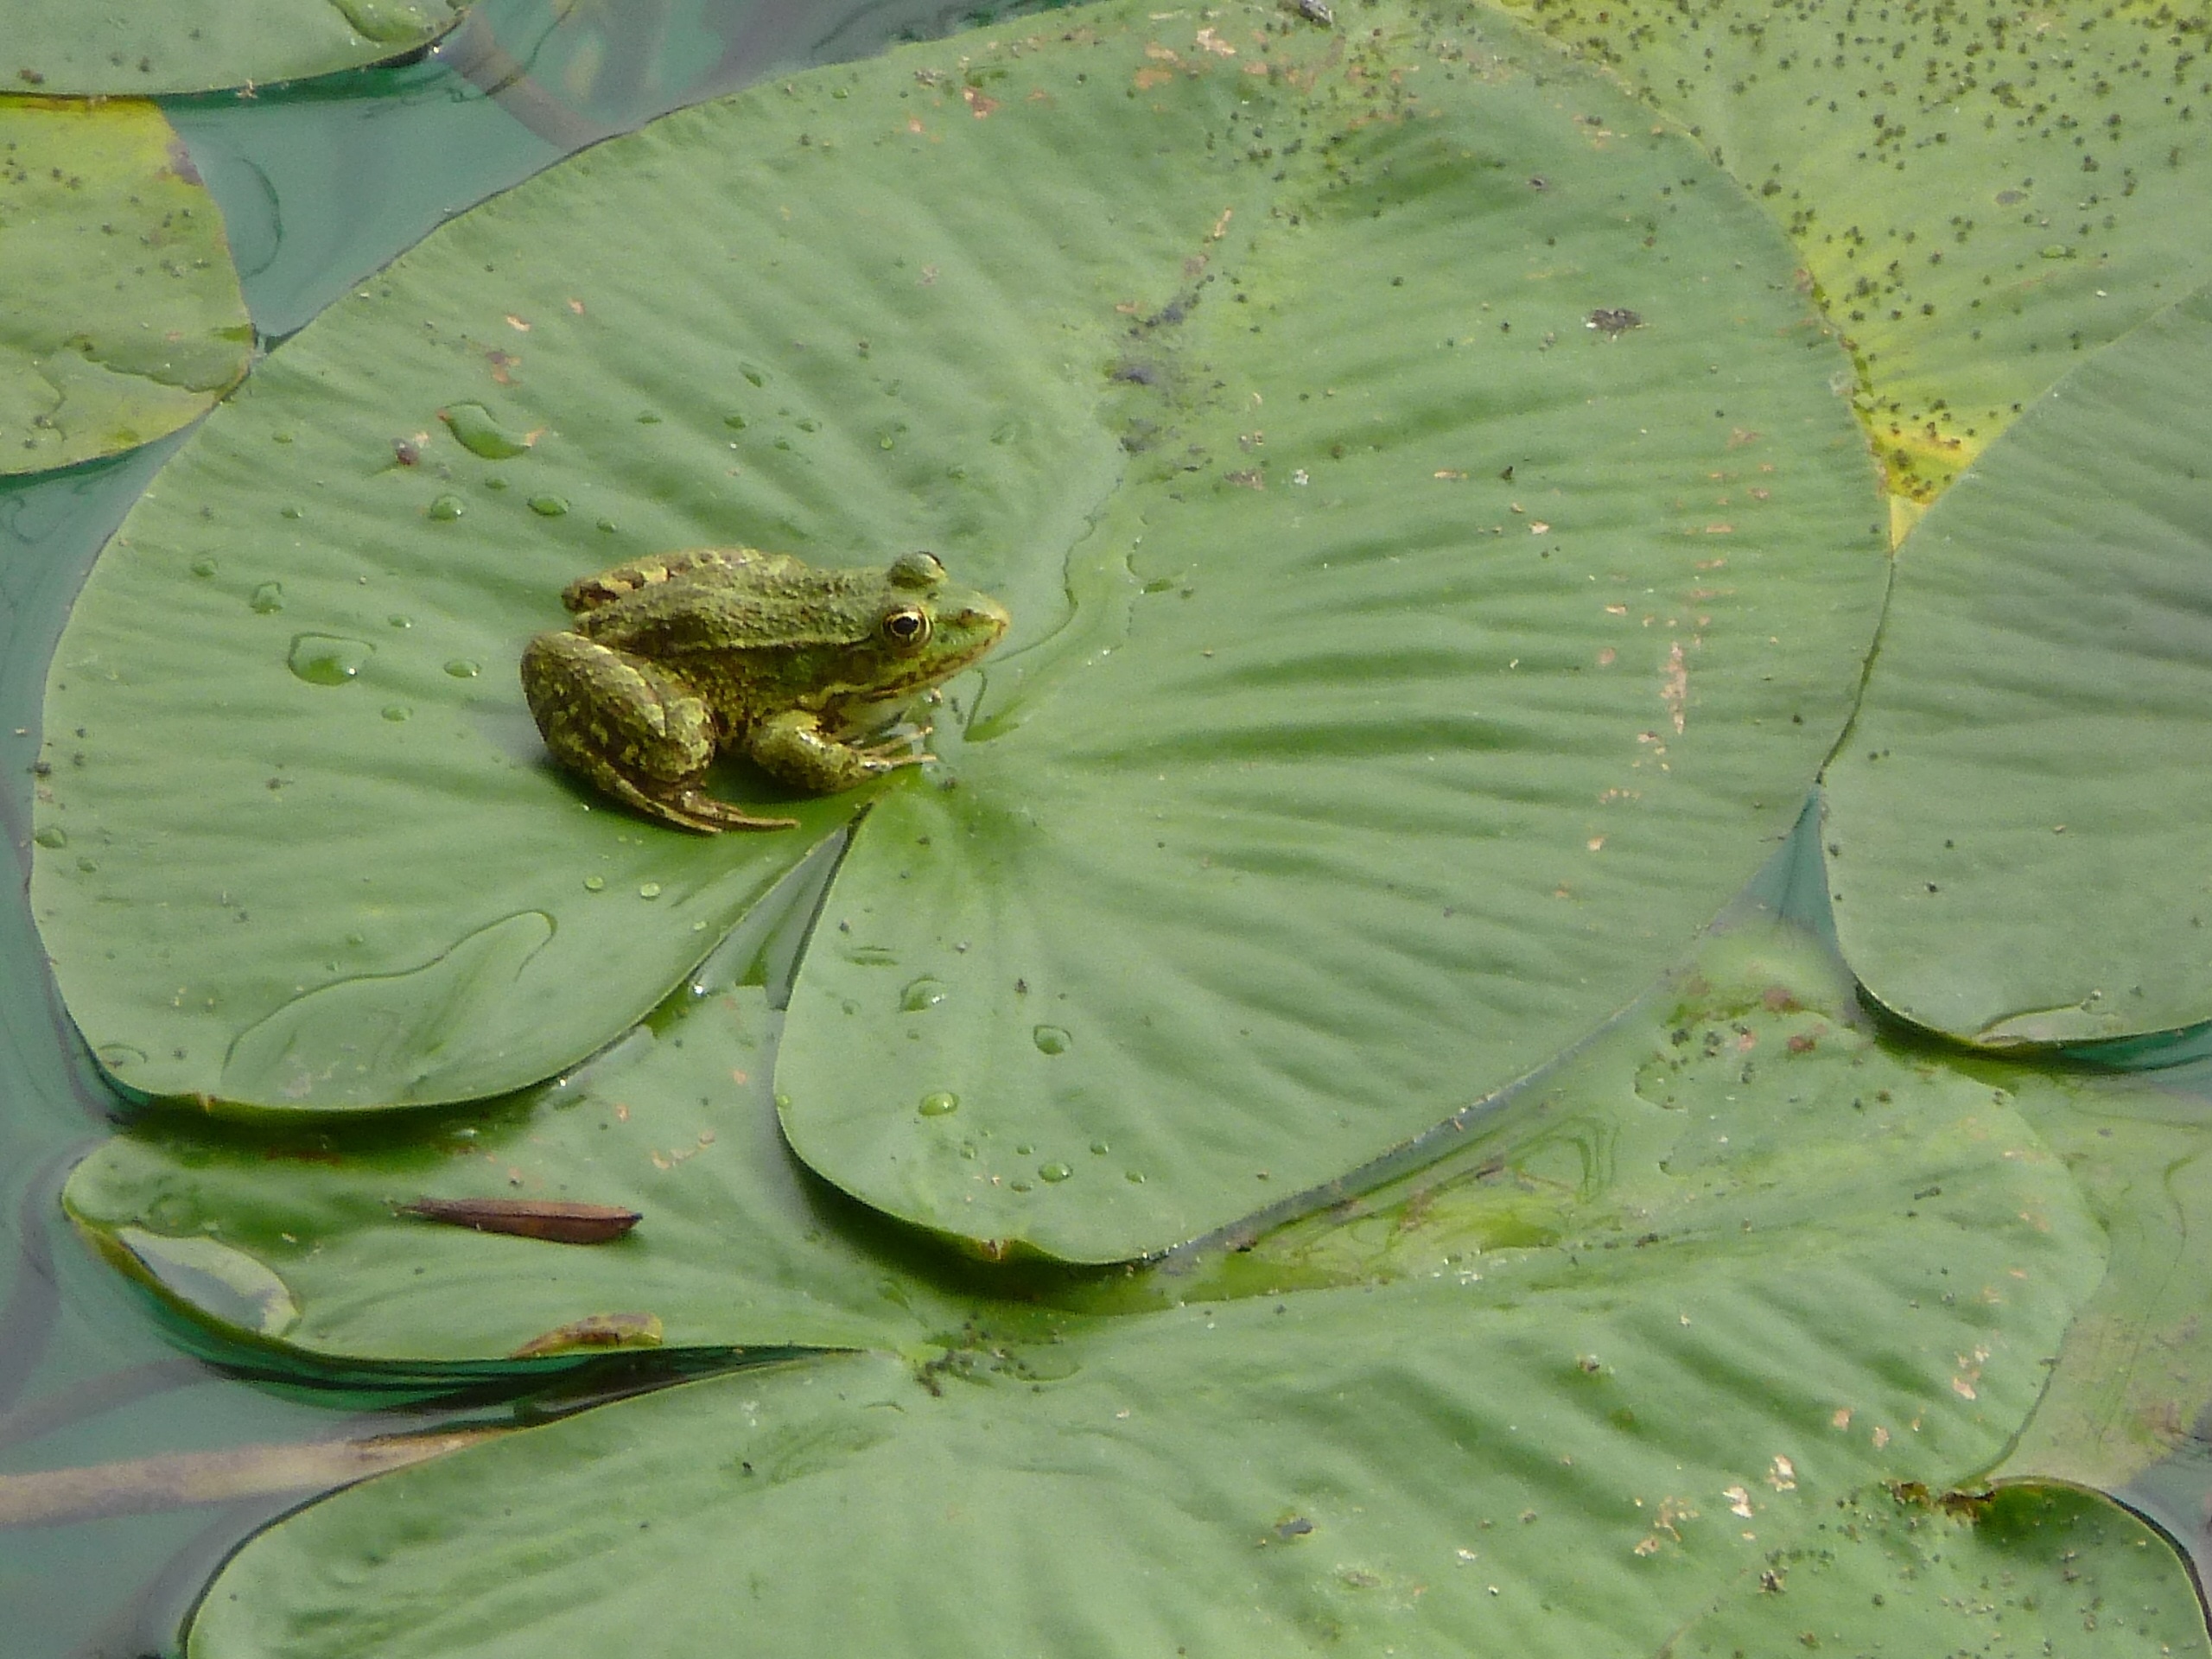 green frog and water lily plant